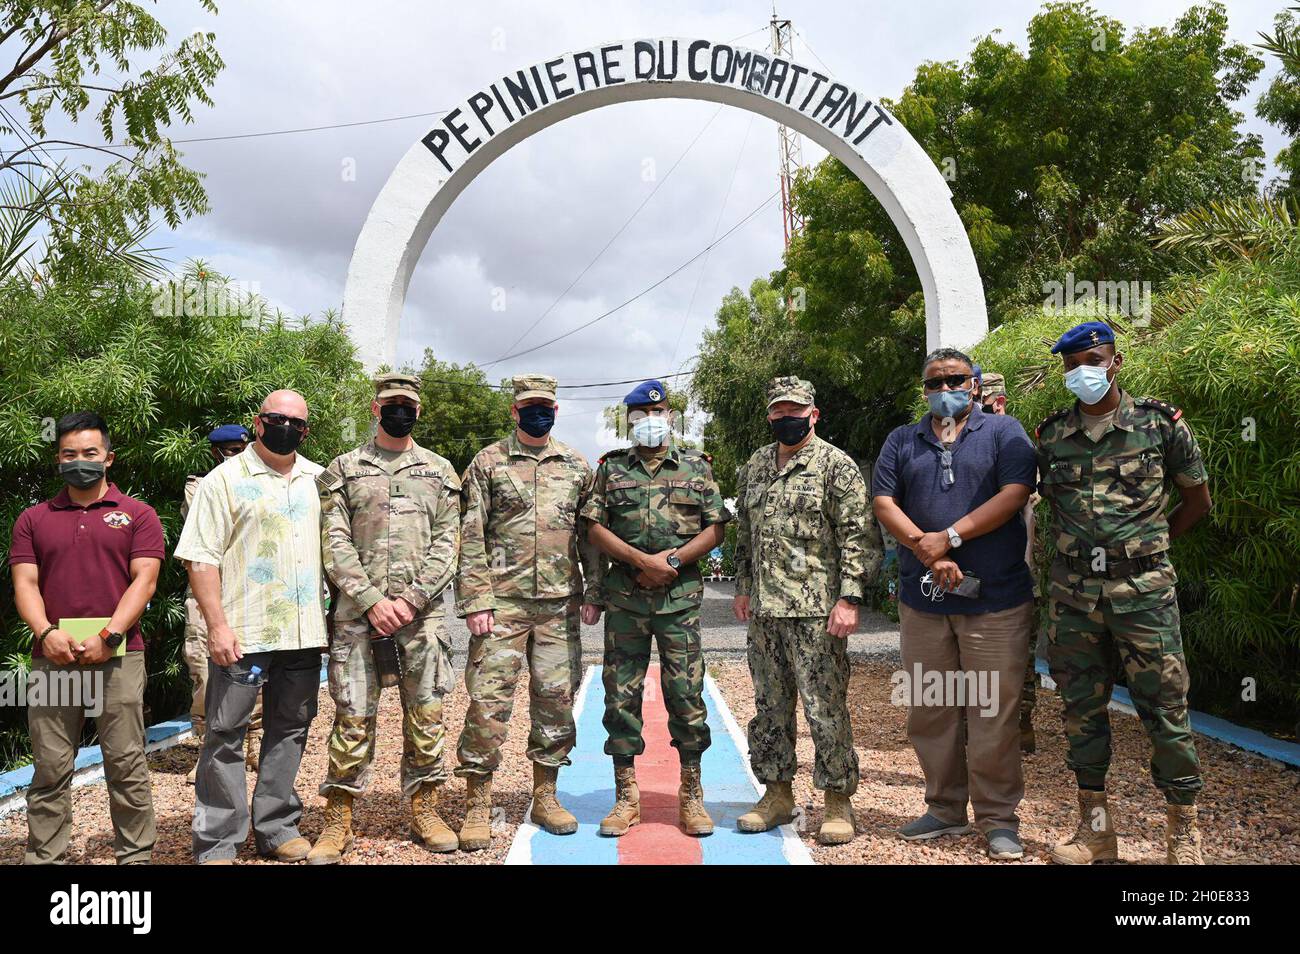 Members of the Combined Joint Task Force- Horn of Africa (CJTF-HOA) staff, Civil Affairs East Africa, the Kentucky National Guard and U.S. Embassy Djibouti pose for a photo at the FAD military training center at Holhol, Djibouti Feb. 8, 2021. The visit offered an opportunity to see the current training facility and discuss future endeavors between organizations. Stock Photo